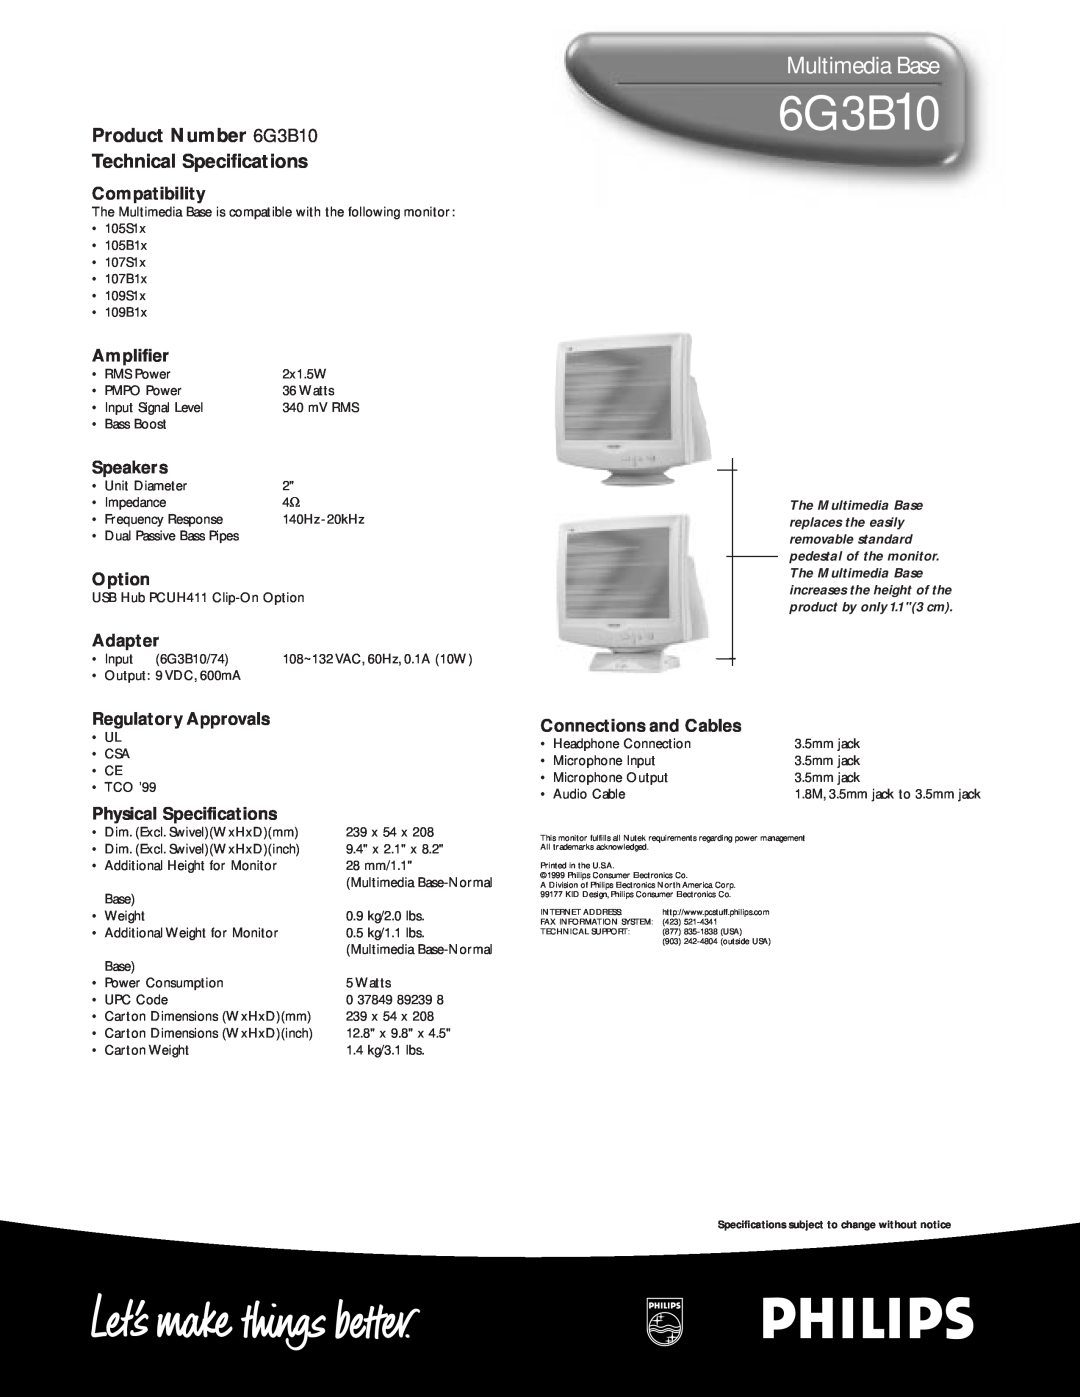 Philips Multimedia Base, Product Number 6G3B10 Technical Specifications, Compatibility, Amplifier, Speakers, Option 